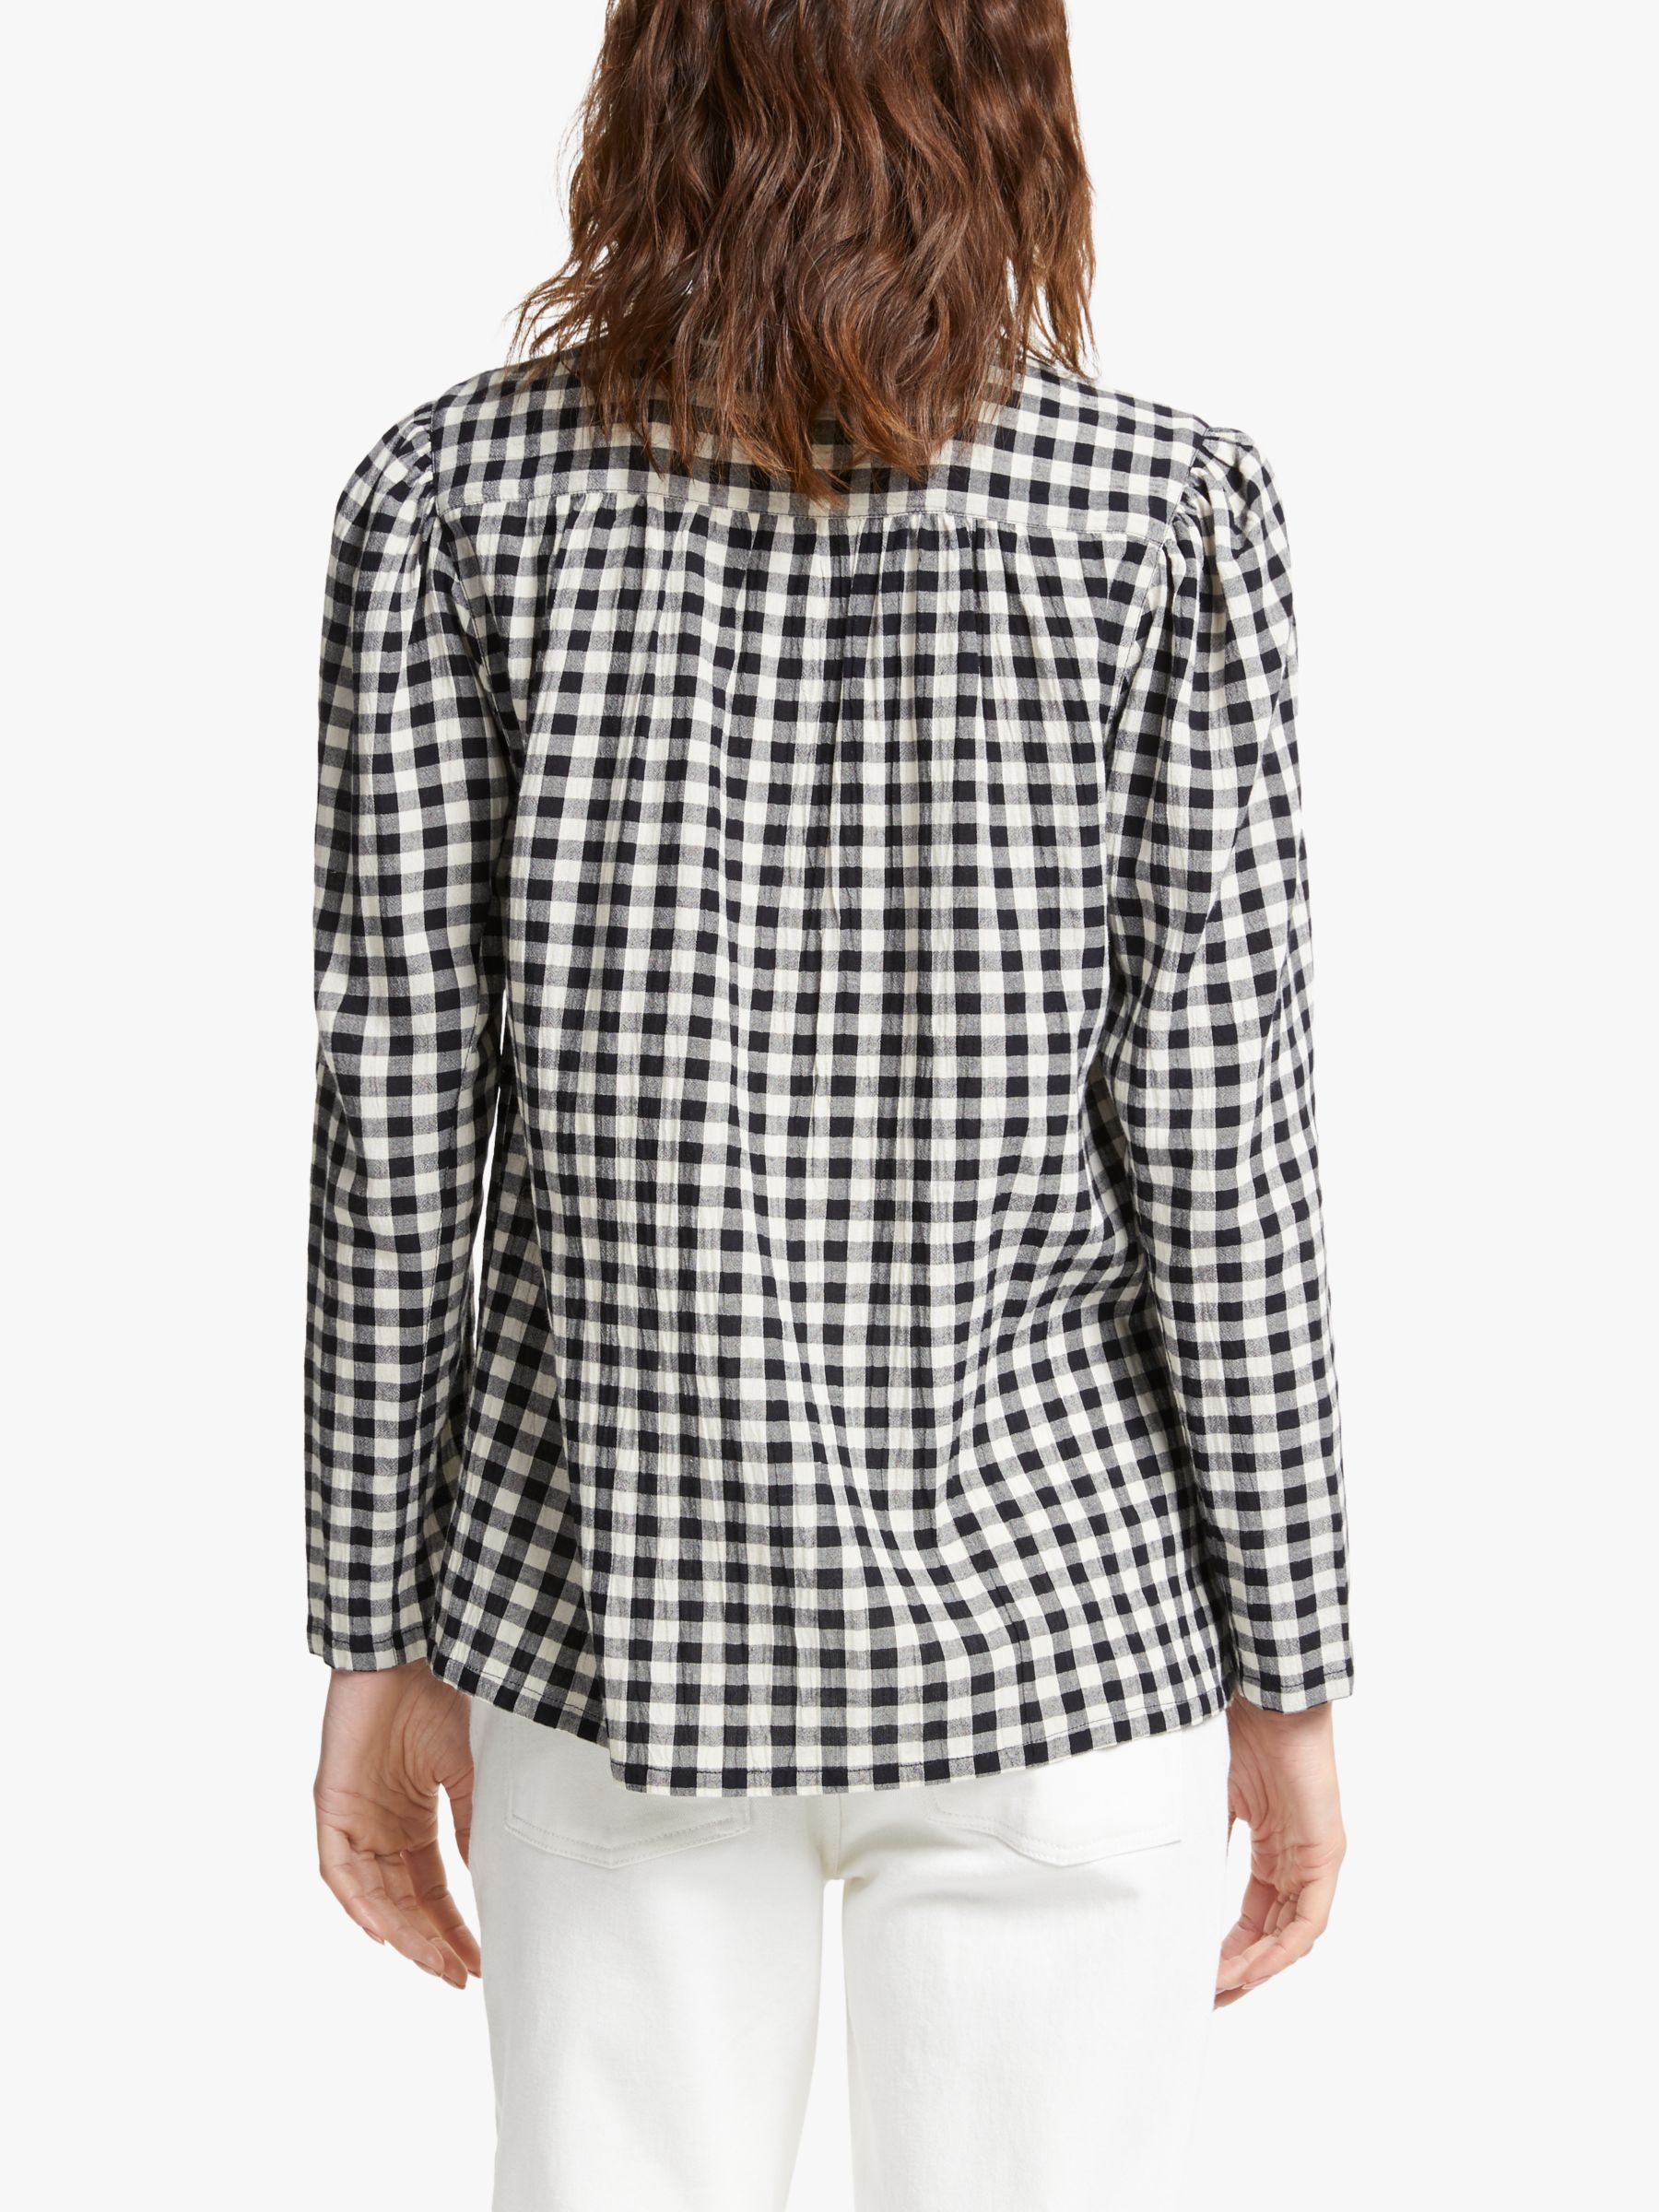 AND/OR Maudie Check Shirt, Black/White, 12